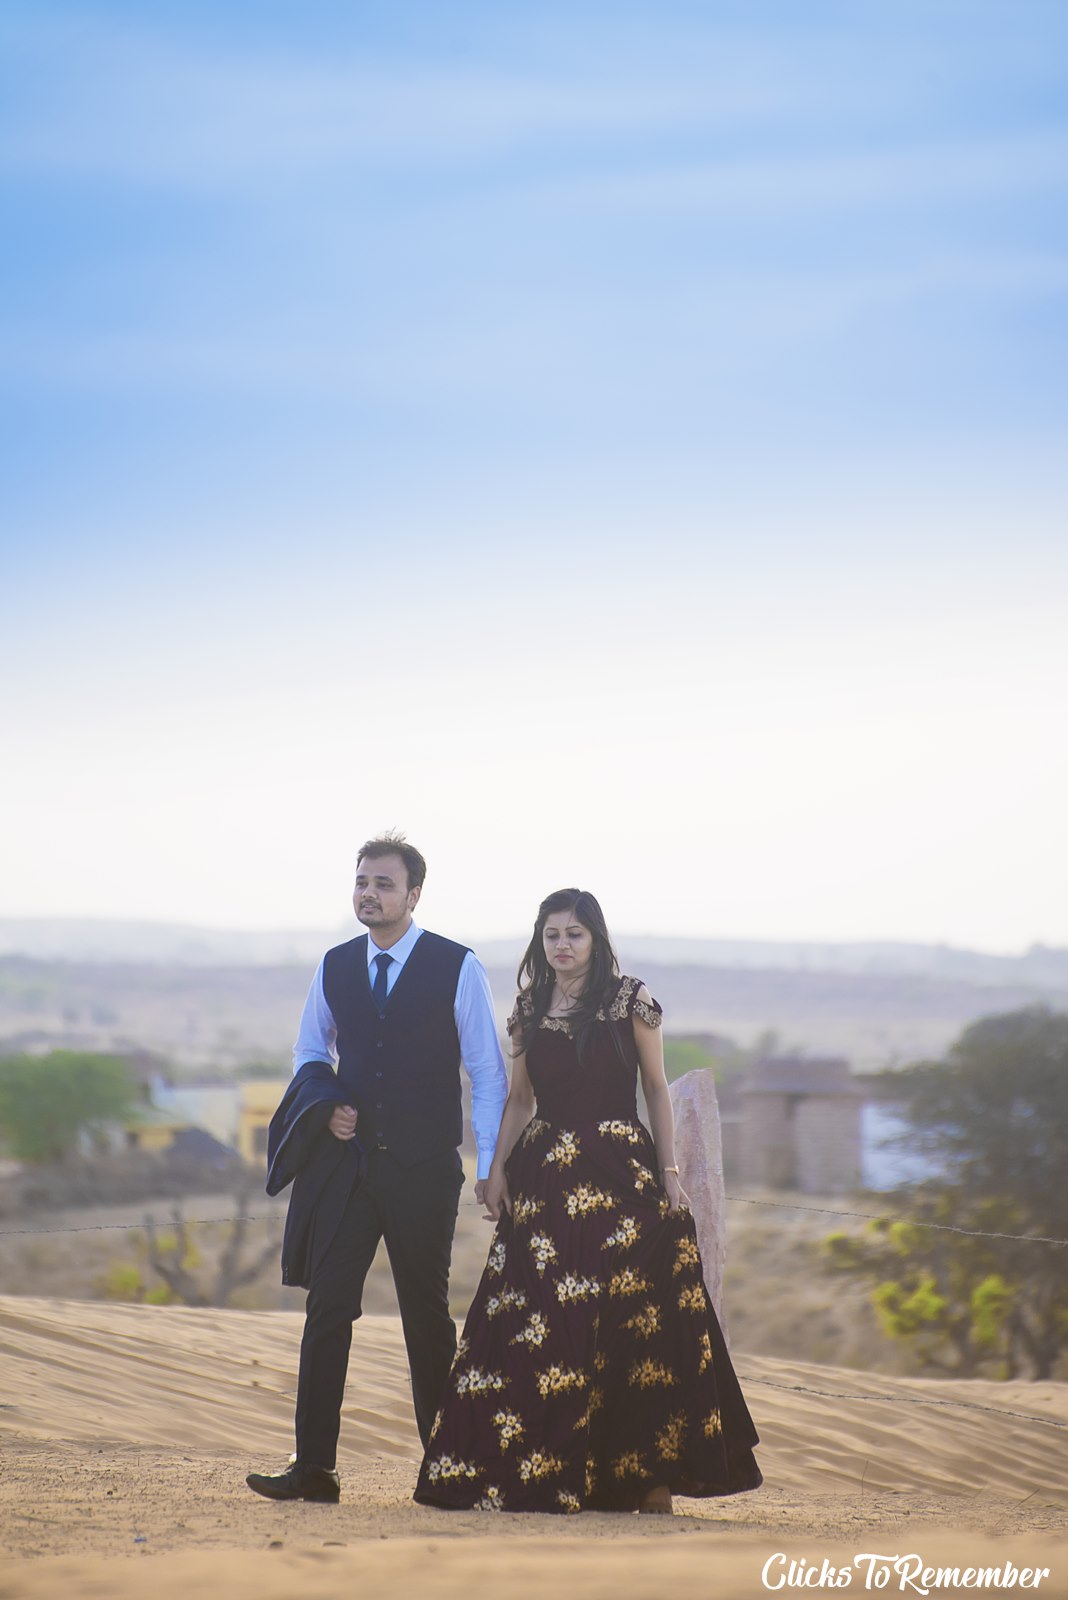 Beautiful Prewedding Photography of couple in Udaipur and Jodhpur 007 Pre wedding shoot of a lovely couple, Khushboo & Hardik, in Udaipur & Jodhpur.